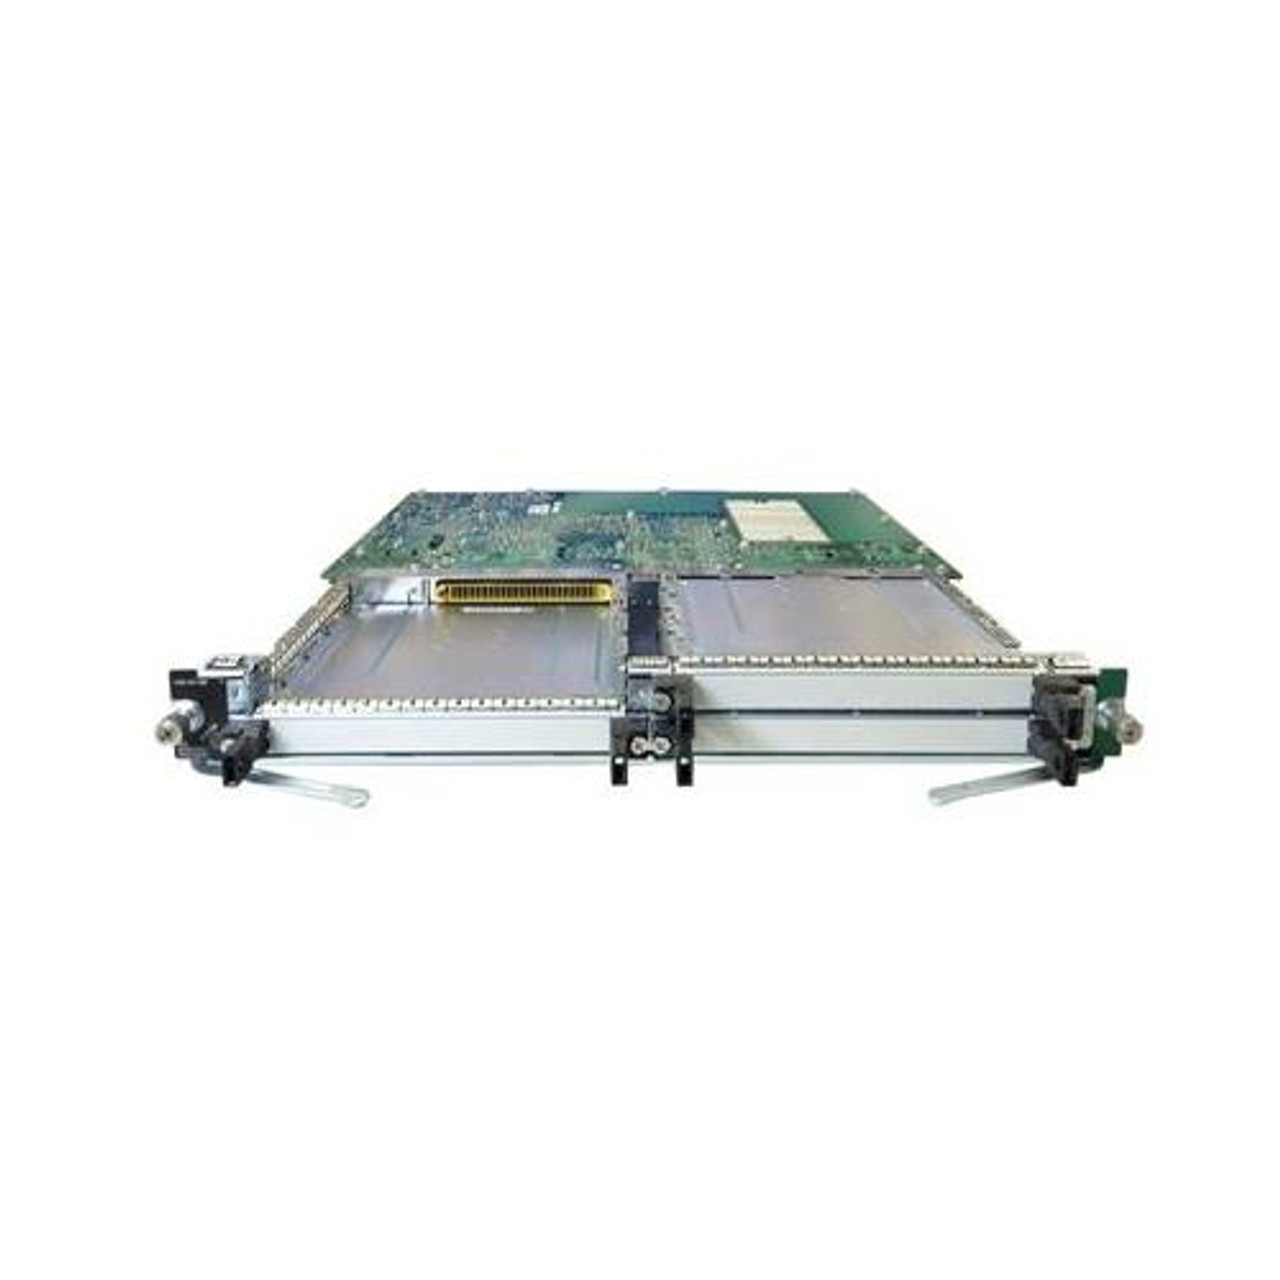 FR-CPA-TN3270S= Cisco TN3270 Server for The ECPA4 (Spare) (Refurbished)